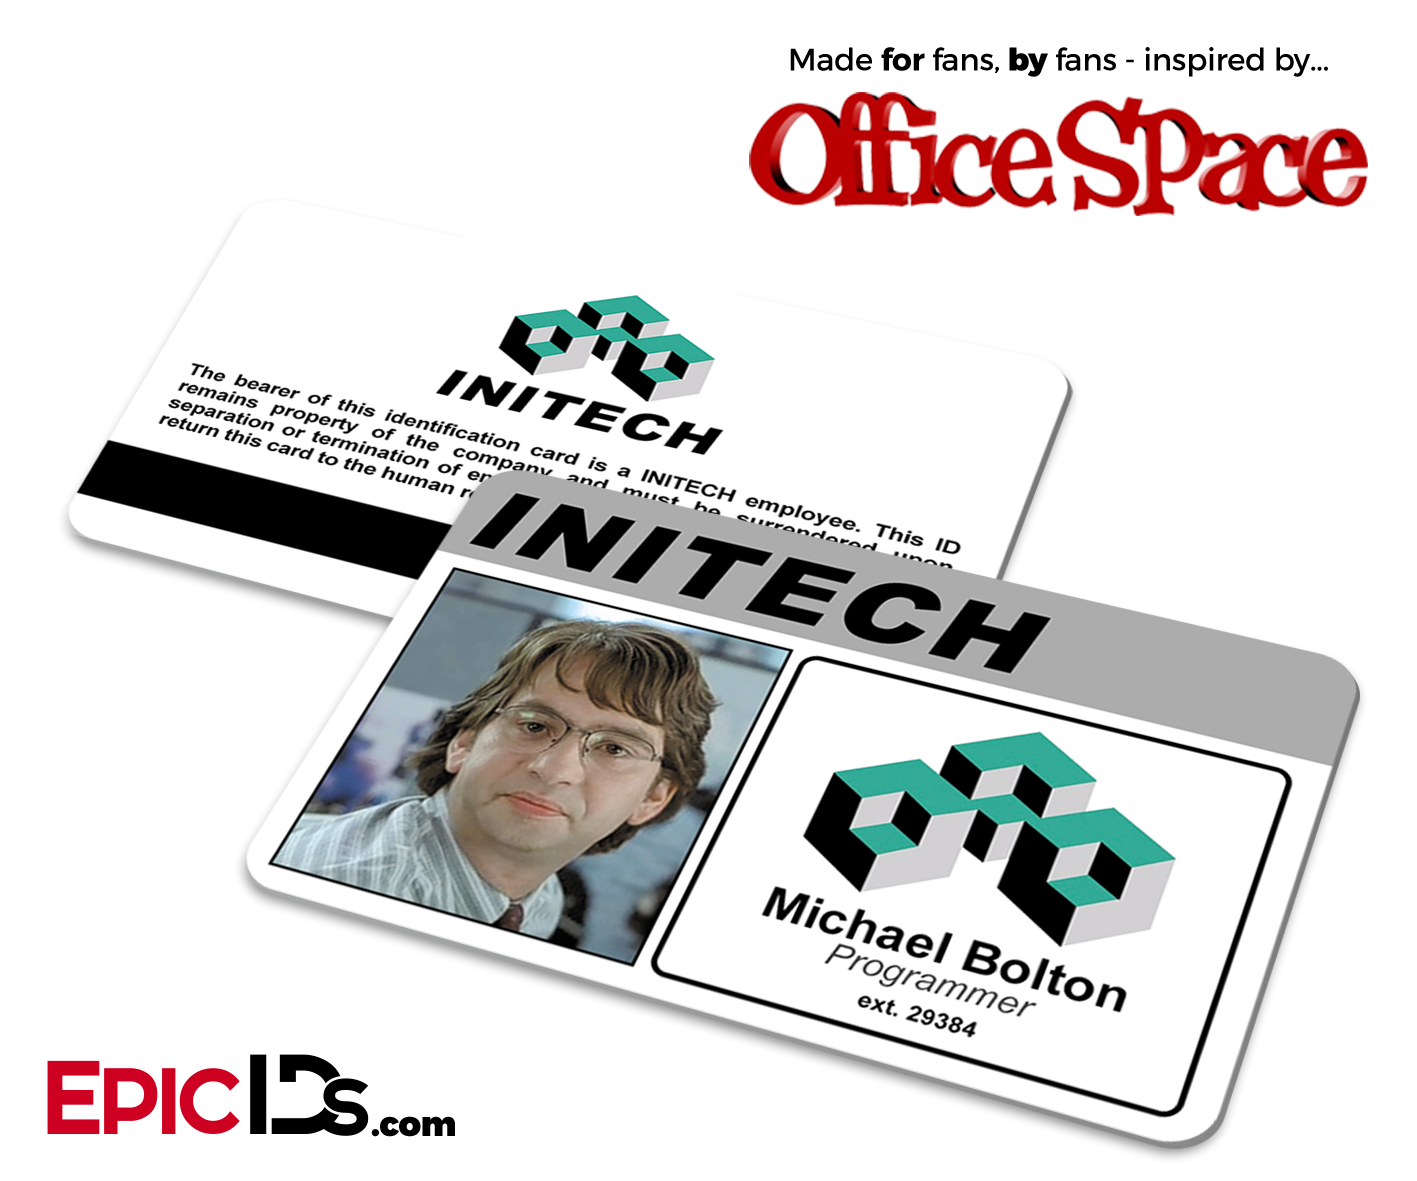 Office Space Inspired Initech Employee ID / Name Badge - Michael Bolto -  Epic IDs